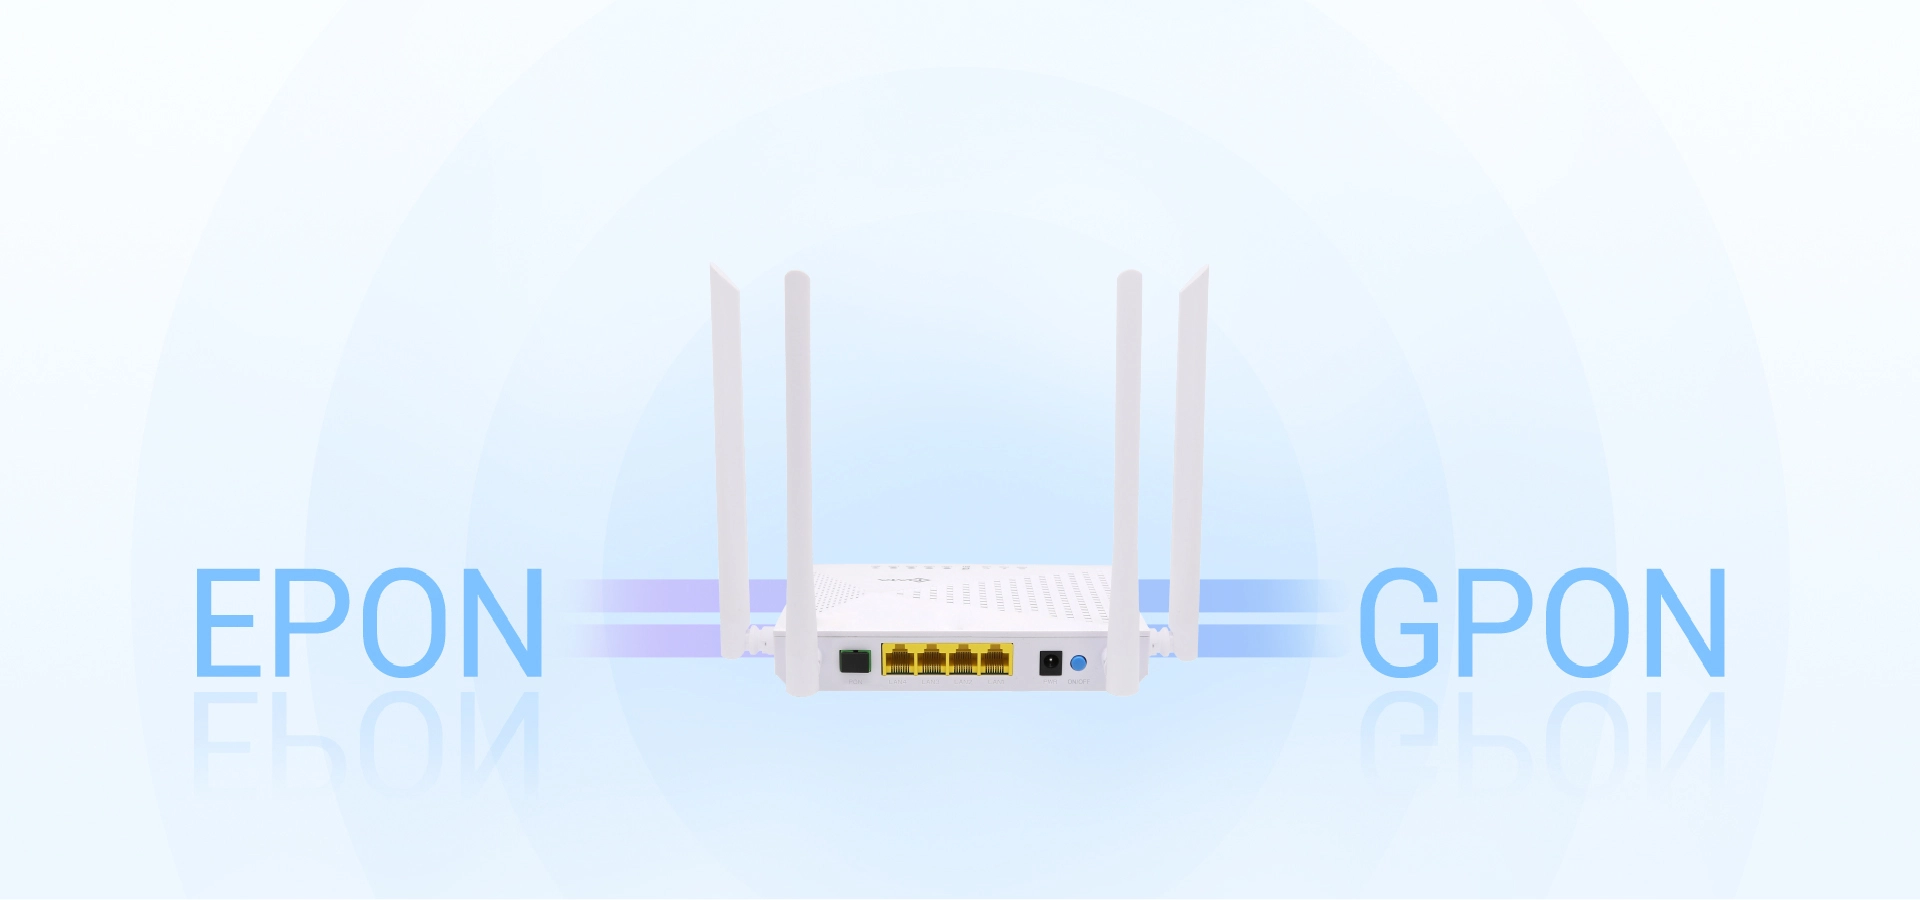 EPON/GPON Dual-mode Access Reduce the Investment of Operators